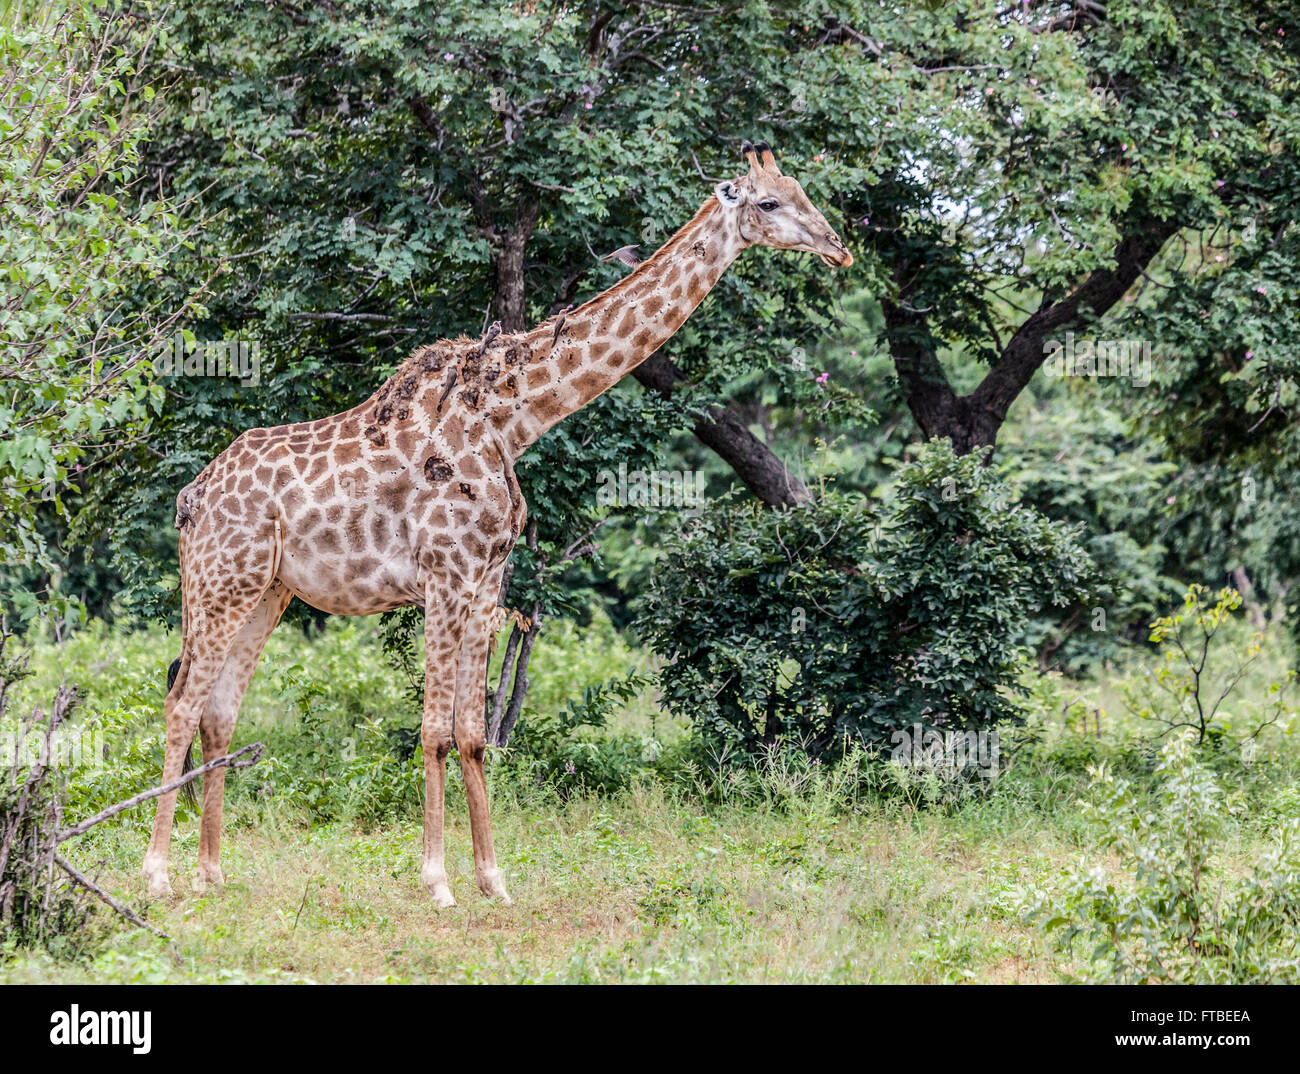 Giraffe with skin disease caused by Papilloma virus. The lesions are being kept open &spread by Red-billed Oxpeckers. Chobe N.P. Stock Photo